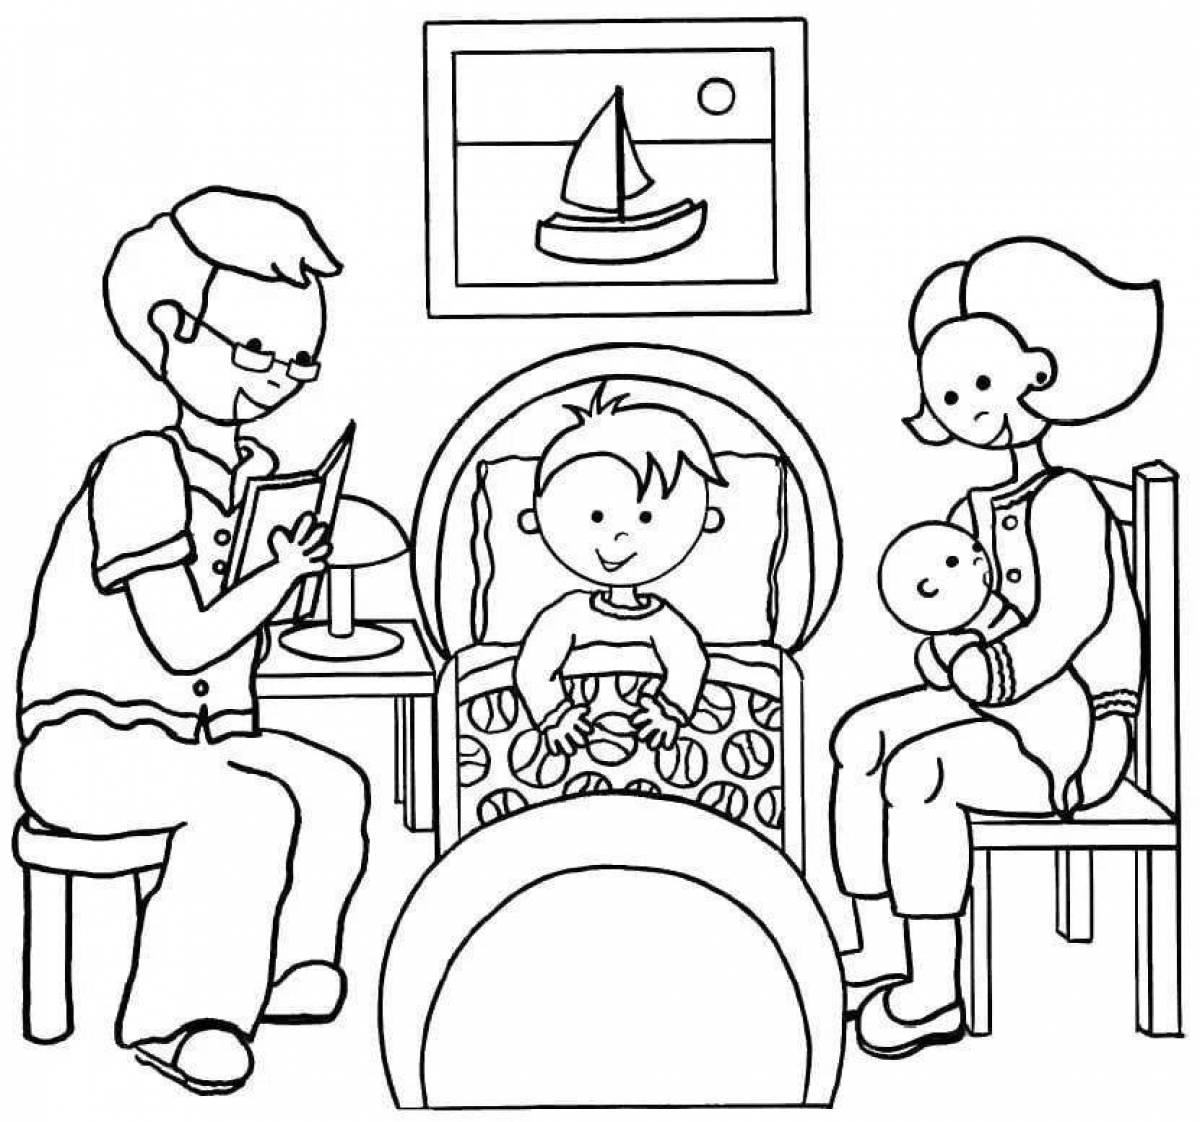 Adorable family coloring book for kids